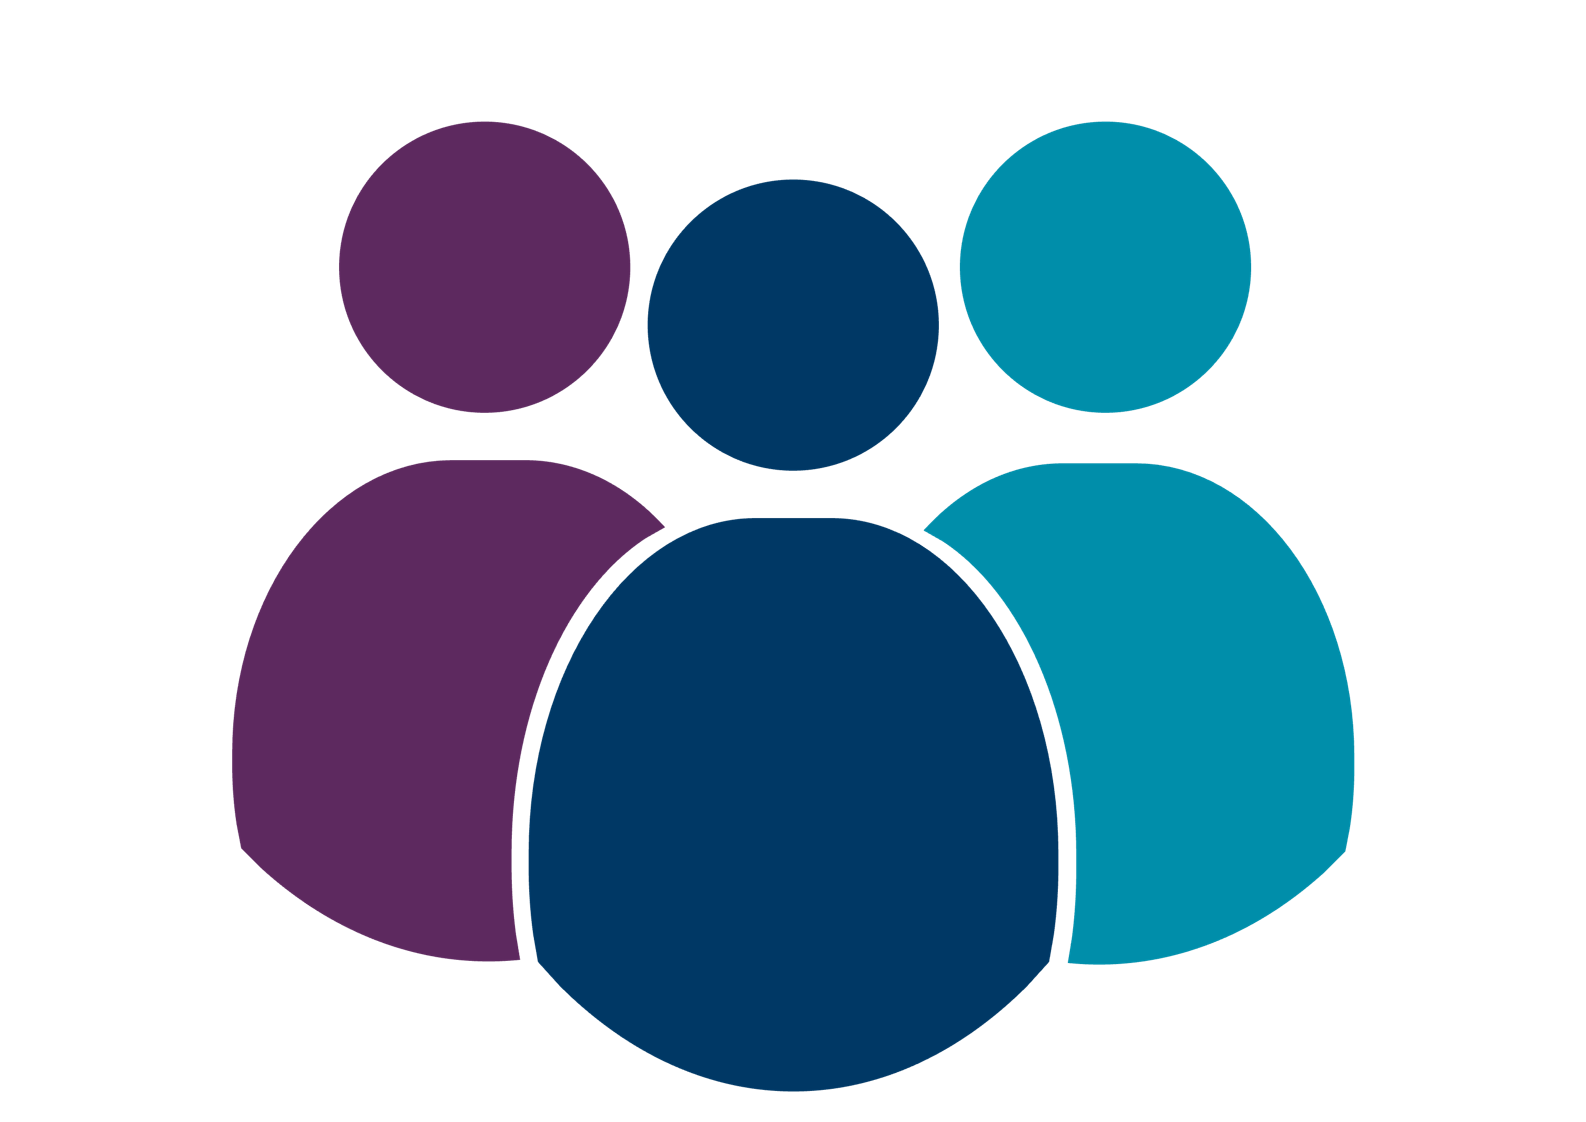 Icon of three individuals, one purple, one dark blue, and one light blue